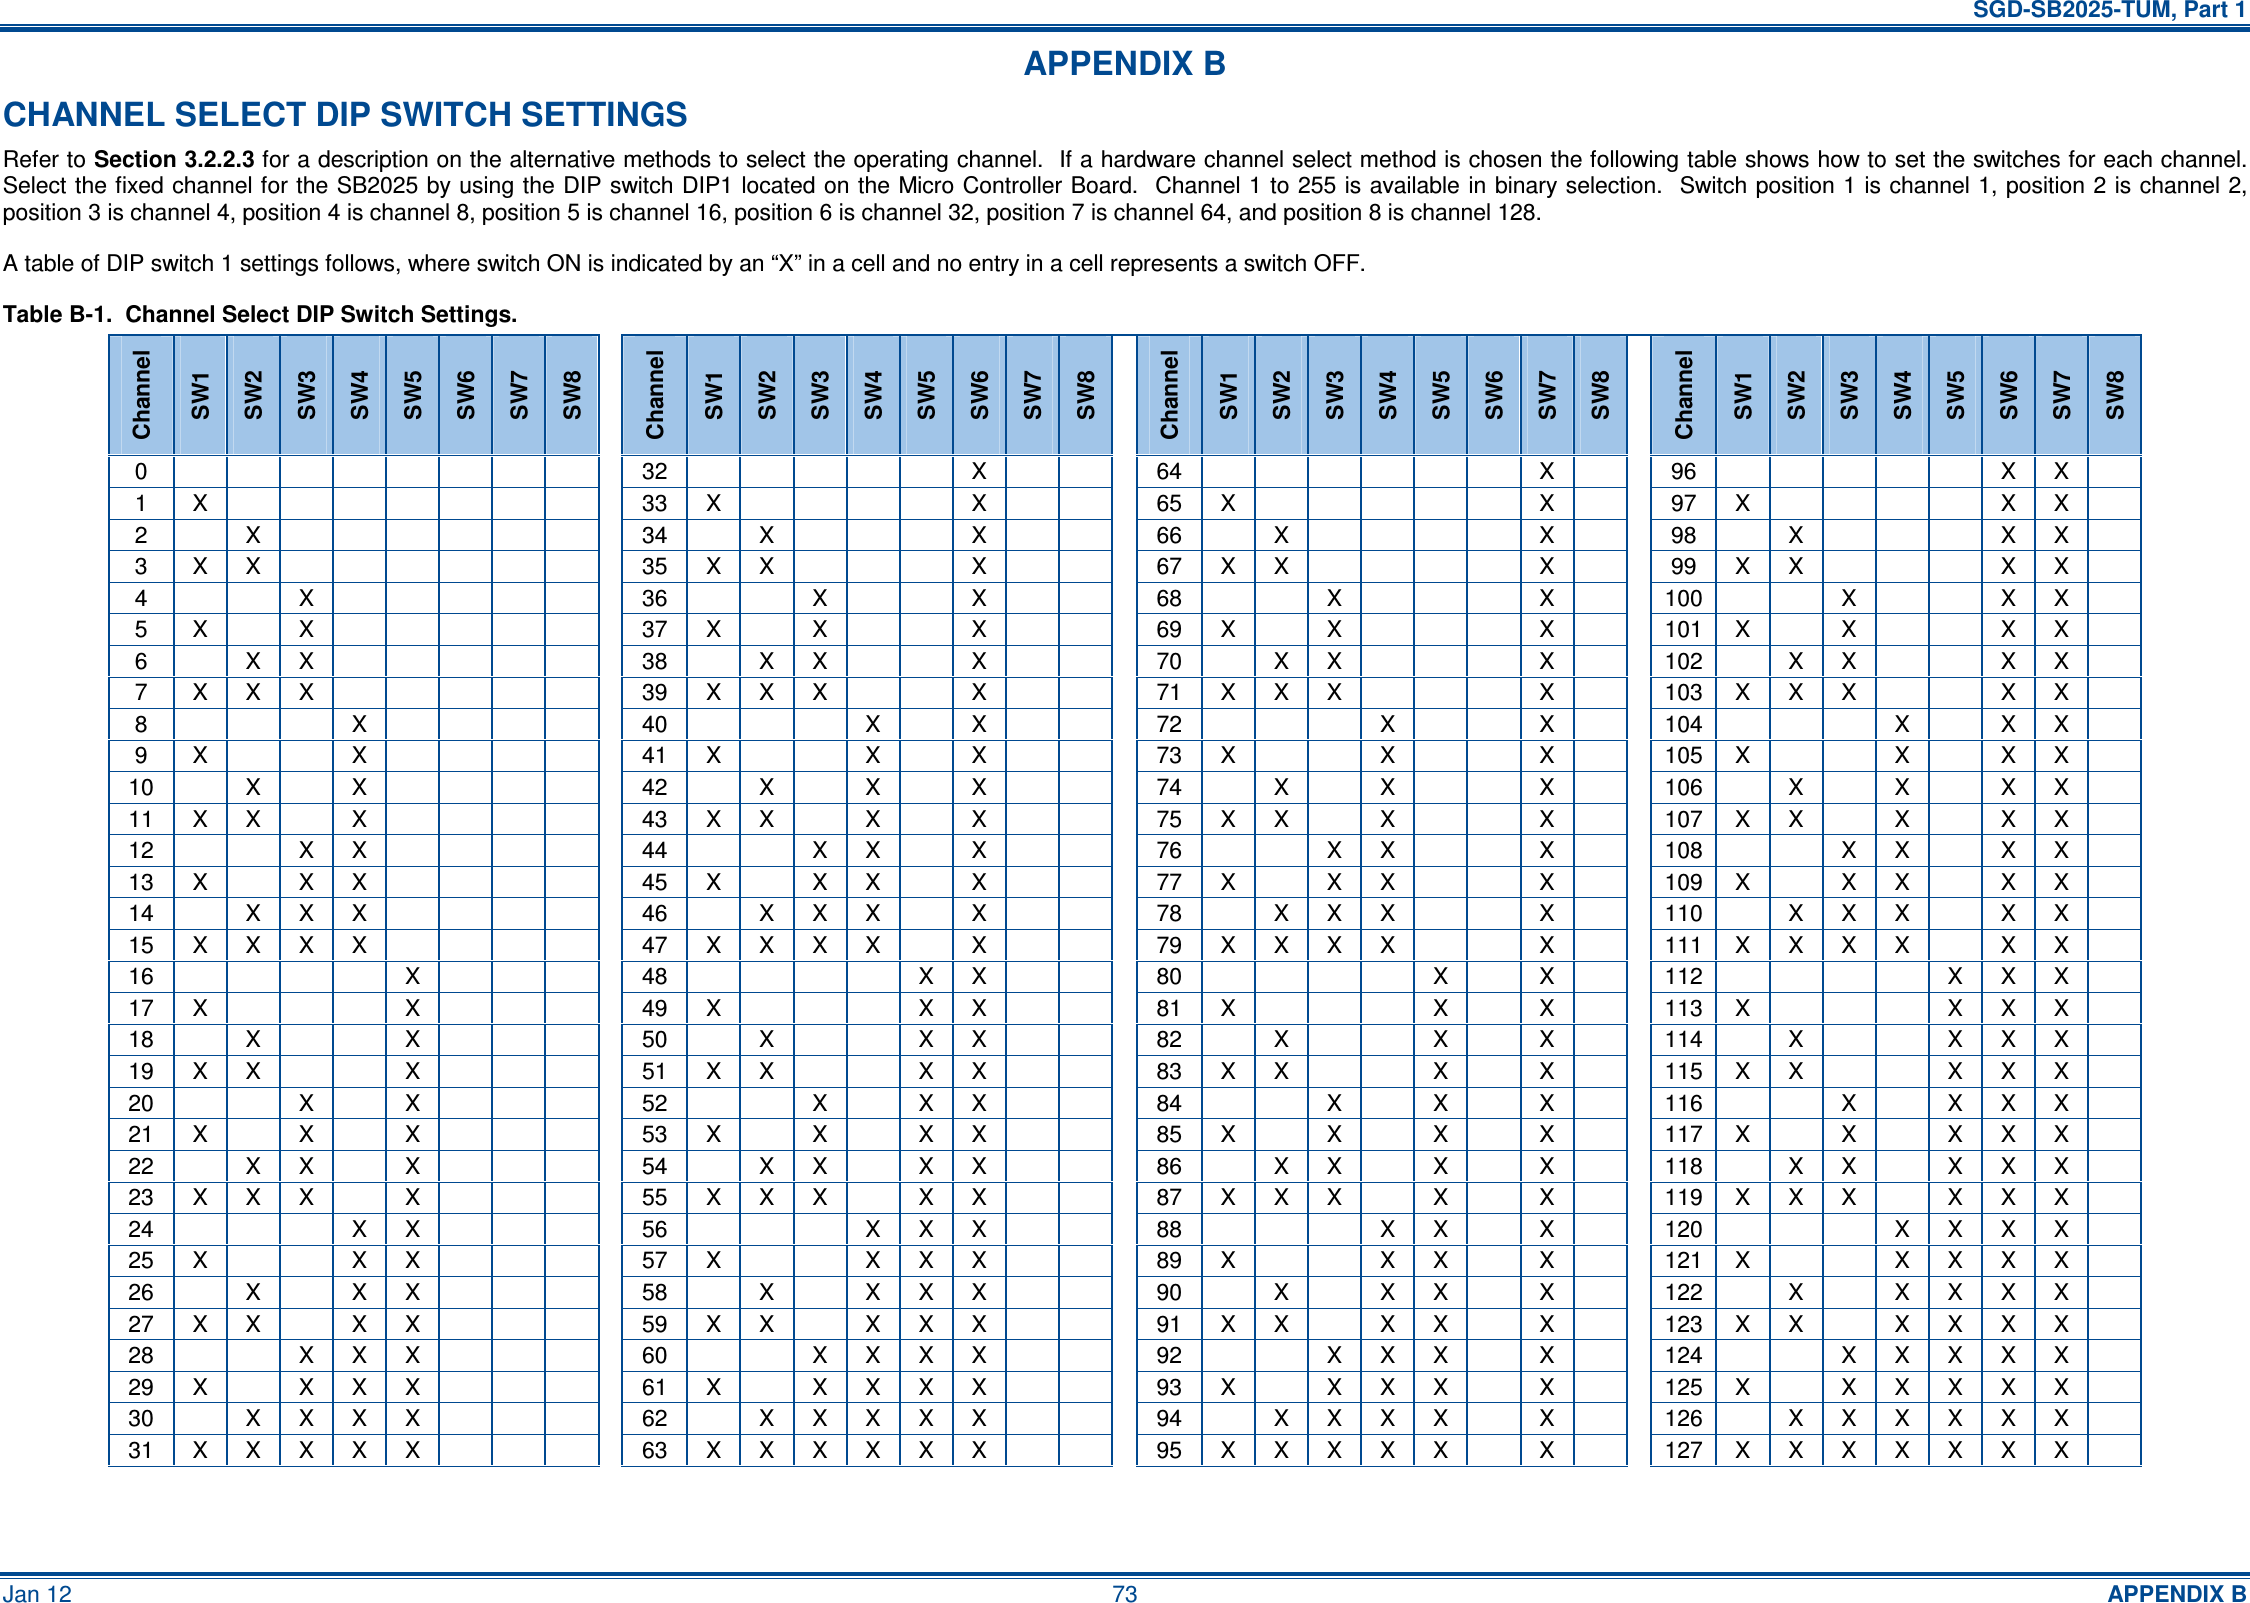   SGD-SB2025-TUM, Part 1 Jan 12  73  APPENDIX B APPENDIX B CHANNEL SELECT DIP SWITCH SETTINGS Refer to Section 3.2.2.3 for a description on the alternative methods to select the operating channel.  If a hardware channel select method is chosen the following table shows how to set the switches for each channel.  Select the fixed channel for the SB2025 by using the DIP switch DIP1 located on the Micro Controller Board.  Channel 1 to 255 is available in binary selection.  Switch position 1 is channel 1, position 2 is channel 2, position 3 is channel 4, position 4 is channel 8, position 5 is channel 16, position 6 is channel 32, position 7 is channel 64, and position 8 is channel 128. A table of DIP switch 1 settings follows, where switch ON is indicated by an “X” in a cell and no entry in a cell represents a switch OFF. Table B-1.  Channel Select DIP Switch Settings. Channel SW1 SW2 SW3 SW4 SW5 SW6 SW7 SW8  Channel SW1 SW2 SW3 SW4 SW5 SW6 SW7 SW8  Channel SW1 SW2 SW3 SW4 SW5 SW6 SW7 SW8  Channel SW1 SW2 SW3 SW4 SW5 SW6 SW7 SW8 0                    32            X      64              X    96            X  X   1  X                  33  X          X      65  X            X    97  X          X  X   2    X                34    X        X      66    X          X    98    X        X  X   3  X  X                35  X  X        X      67  X  X          X    99  X  X        X  X   4      X              36      X      X      68      X        X    100     X      X  X   5  X    X              37  X    X      X      69  X    X        X    101 X    X      X  X   6    X  X              38    X  X      X      70    X  X        X    102   X  X      X  X   7  X  X  X              39  X  X  X      X      71  X  X  X        X    103 X  X  X      X  X   8        X            40        X    X      72        X      X    104       X    X  X   9  X      X            41  X      X    X      73  X      X      X    105 X      X    X  X   10    X    X            42    X    X    X      74    X    X      X    106   X    X    X  X   11  X  X    X            43  X  X    X    X      75  X  X    X      X    107 X  X    X    X  X   12      X  X            44      X  X    X      76      X  X      X    108     X  X    X  X   13  X    X  X            45  X    X  X    X      77  X    X  X      X    109 X    X  X    X  X   14    X  X  X            46    X  X  X    X      78    X  X  X      X    110   X  X  X    X  X   15  X  X  X  X            47  X  X  X  X    X      79  X  X  X  X      X    111 X  X  X  X    X  X   16          X        48          X  X      80          X    X    112         X  X  X   17  X        X        49  X        X  X      81  X        X    X    113 X        X  X  X   18    X      X        50    X      X  X      82    X      X    X    114   X      X  X  X   19  X  X      X        51  X  X      X  X      83  X  X      X    X    115 X  X      X  X  X   20      X    X        52      X    X  X      84      X    X    X    116     X    X  X  X   21  X    X    X        53  X    X    X  X      85  X    X    X    X    117 X    X    X  X  X   22    X  X    X        54    X  X    X  X      86    X  X    X    X    118   X  X    X  X  X   23  X  X  X    X        55  X  X  X    X  X      87  X  X  X    X    X    119 X  X  X    X  X  X   24        X  X        56        X  X  X      88        X  X    X    120       X  X  X  X   25  X      X  X        57  X      X  X  X      89  X      X  X    X    121 X      X  X  X  X   26    X    X  X        58    X    X  X  X      90    X    X  X    X    122   X    X  X  X  X   27  X  X    X  X        59  X  X    X  X  X      91  X  X    X  X    X    123 X  X    X  X  X  X   28      X  X  X        60      X  X  X  X      92      X  X  X    X    124     X  X  X  X  X   29  X    X  X  X        61  X    X  X  X  X      93  X    X  X  X    X    125 X    X  X  X  X  X   30    X  X  X  X        62    X  X  X  X  X      94    X  X  X  X    X    126   X  X  X  X  X  X   31  X  X  X  X  X        63  X  X  X  X  X  X      95  X  X  X  X  X    X    127 X  X  X  X  X  X  X     